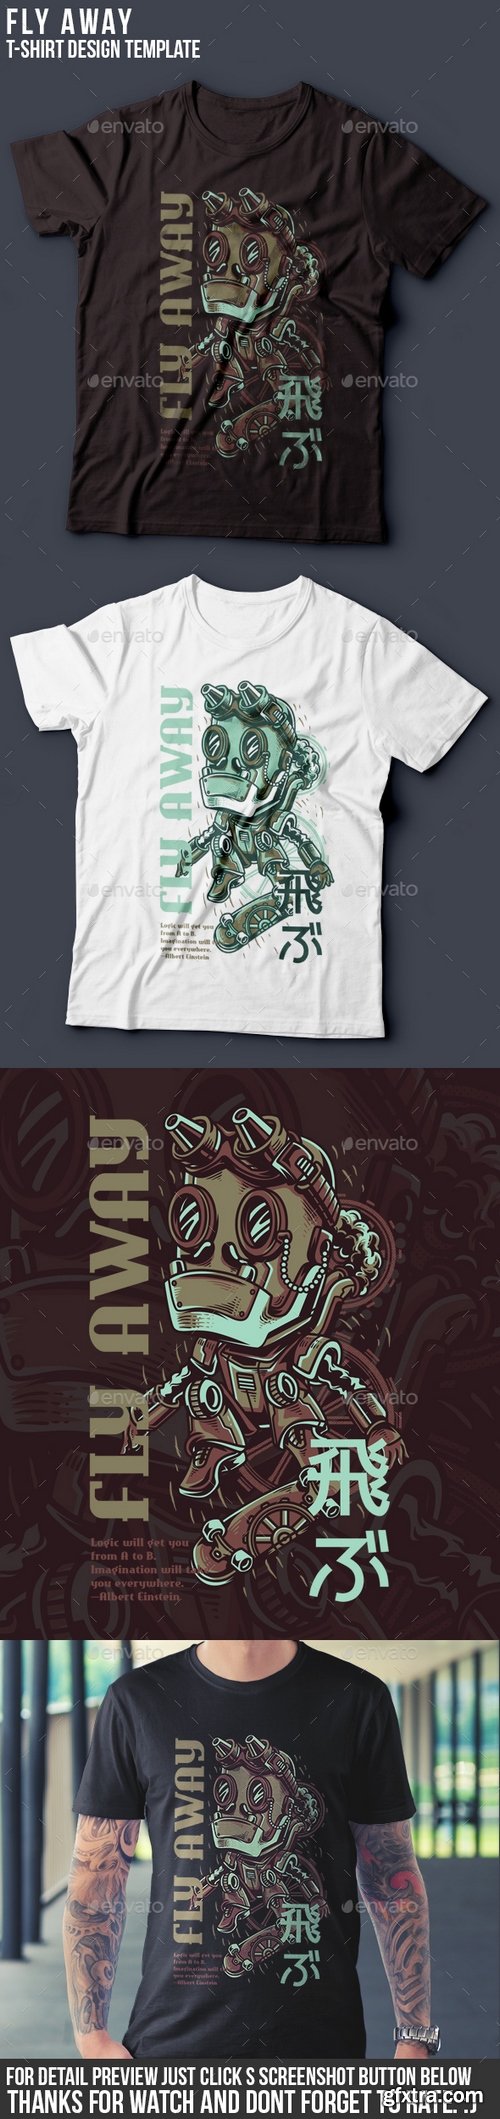 Graphicriver - Fly Away T-Shirt Design 22143339